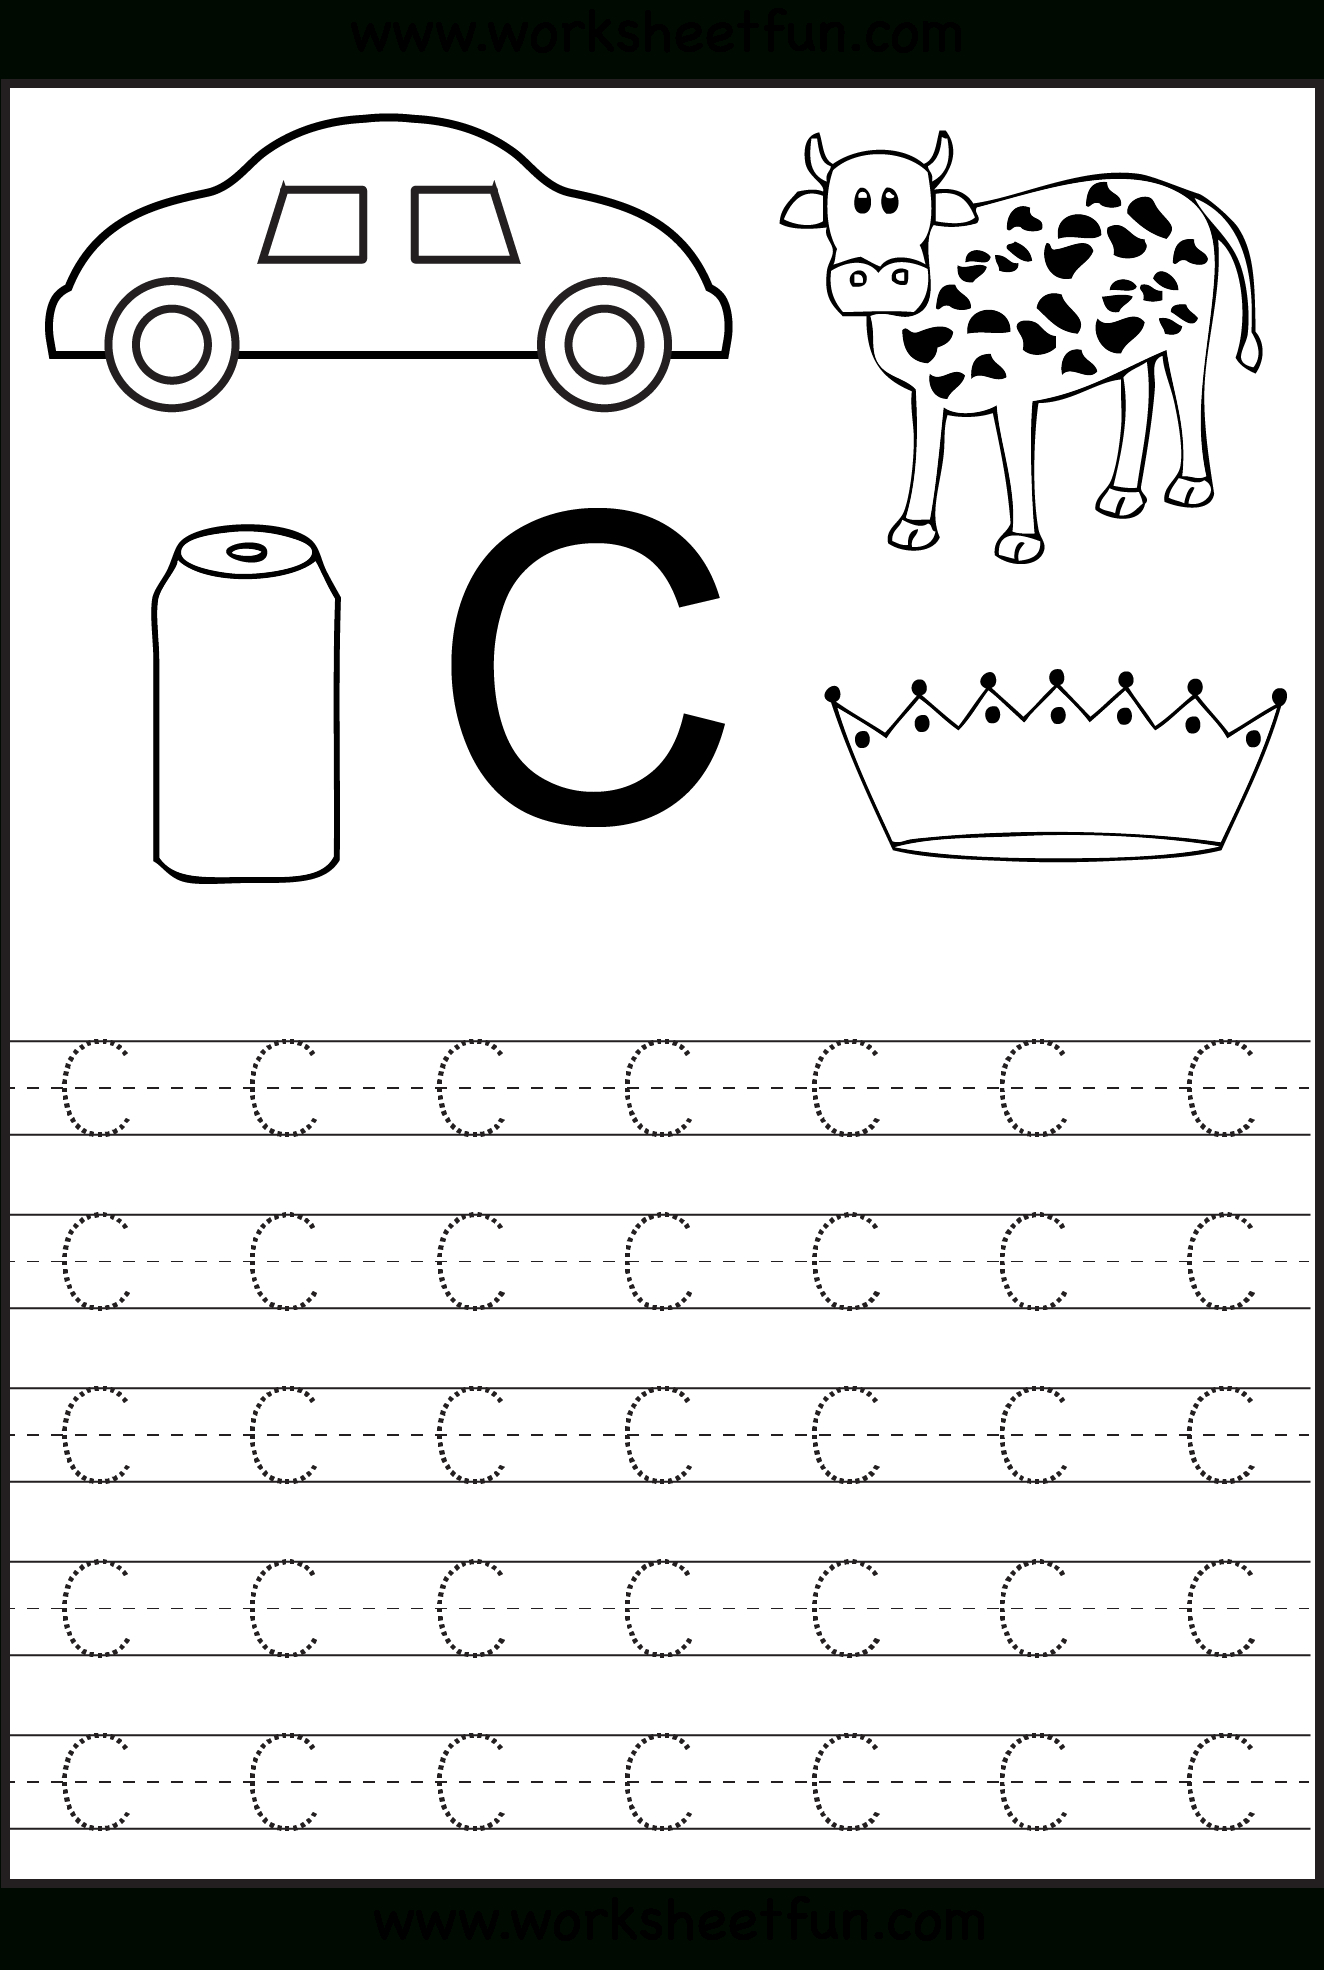 Learning The Letter C | Worksheet | Education within Trace Letter C Worksheets Preschool